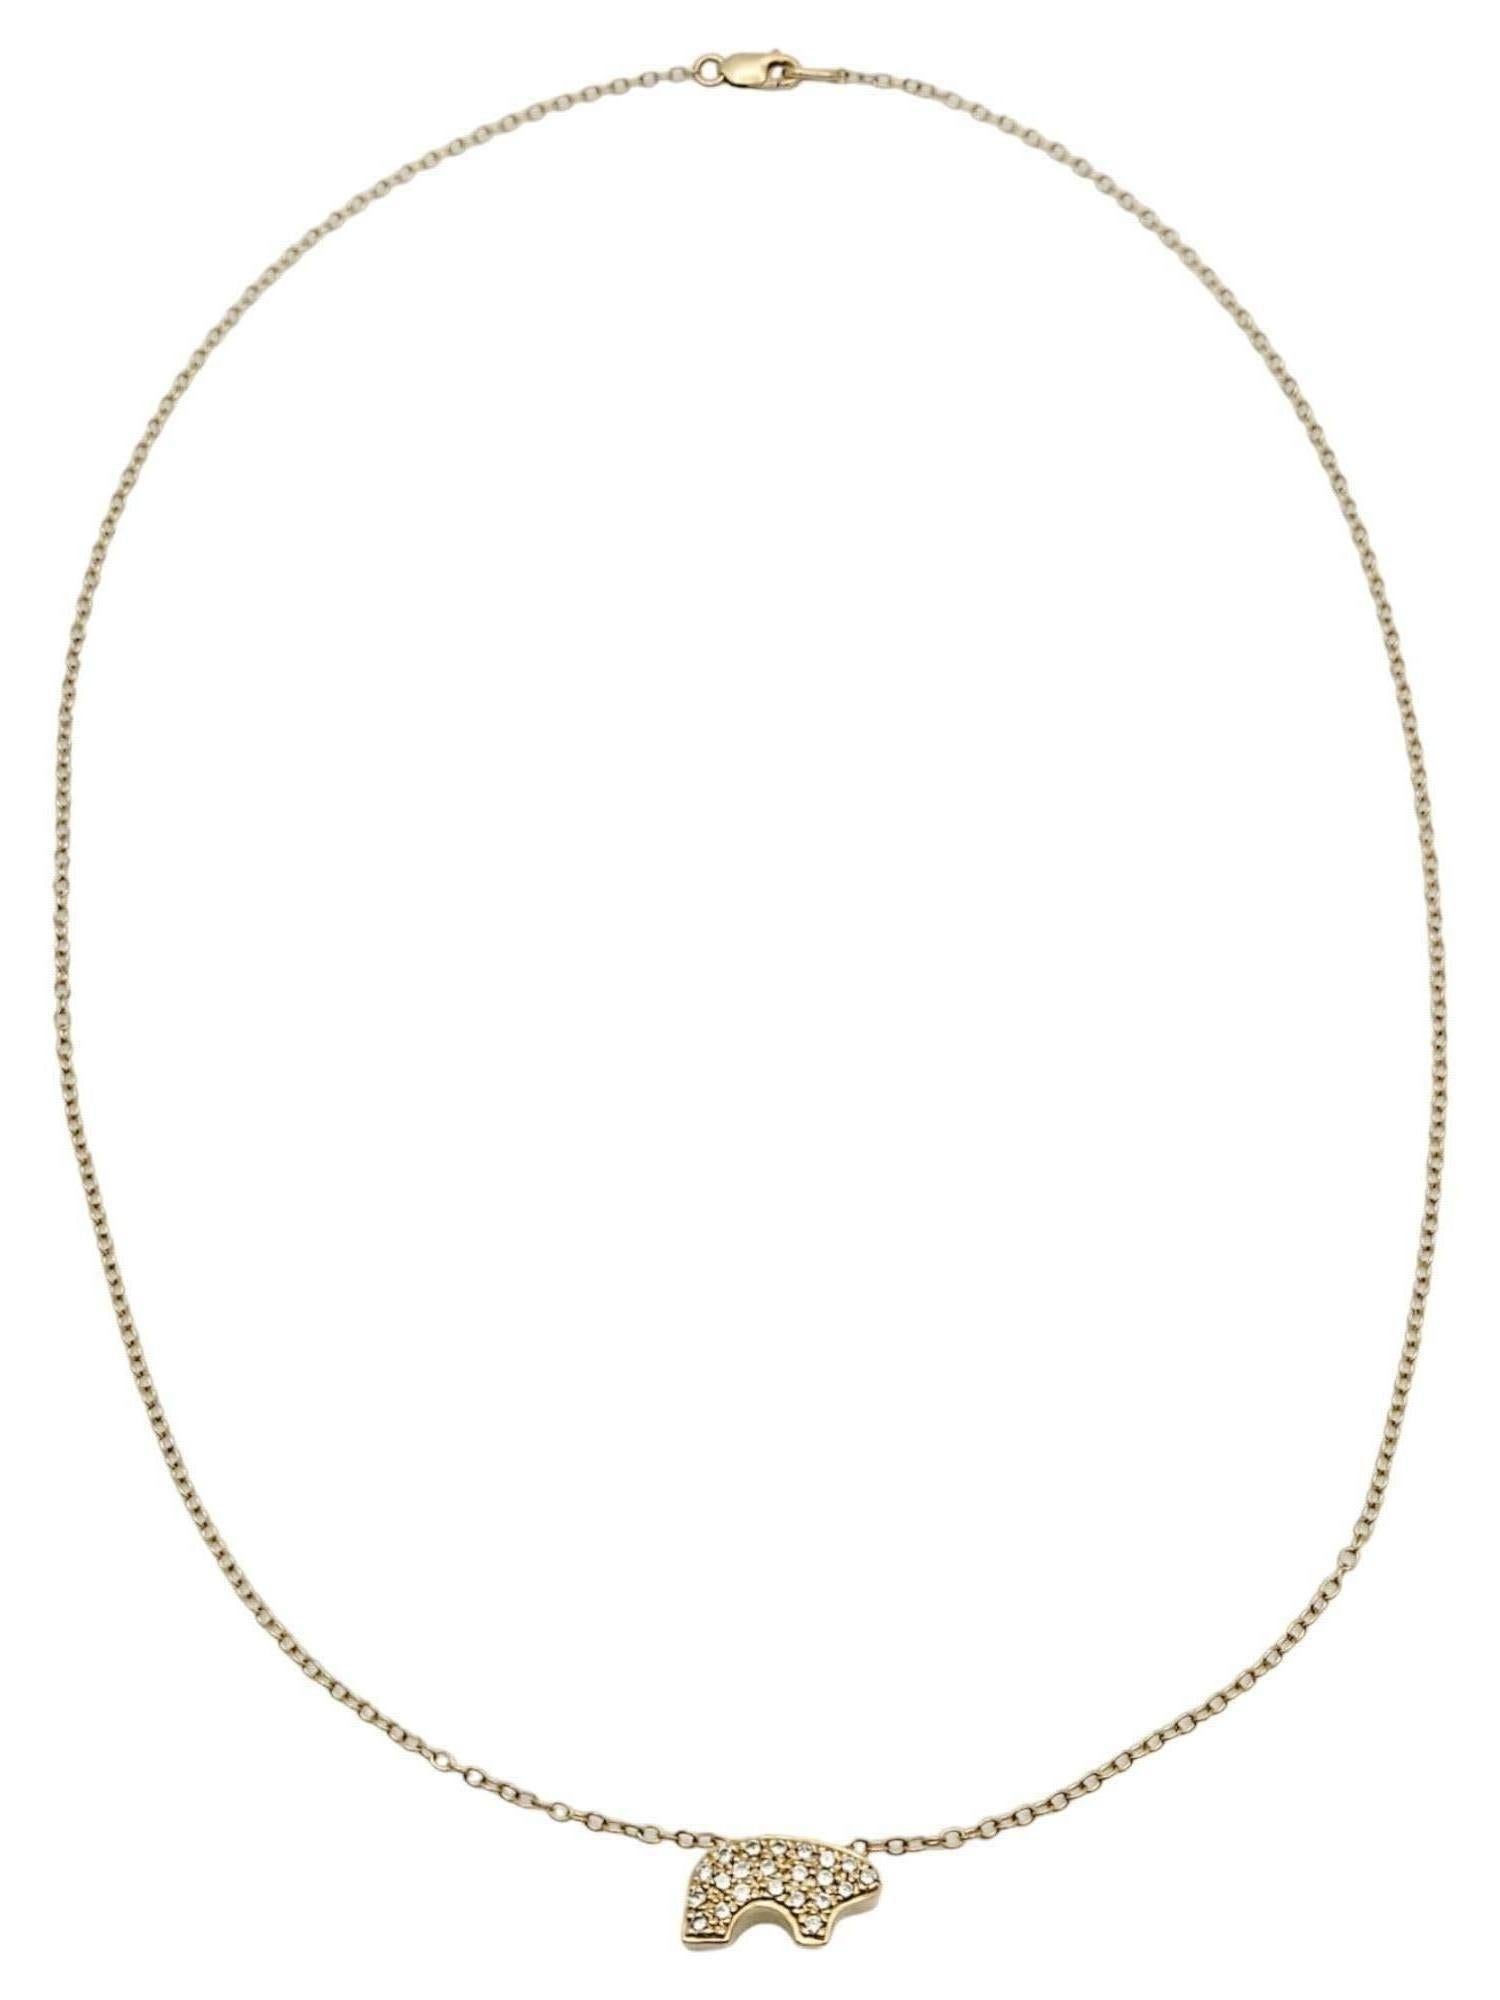 This elegant pendant necklace was designed by The Golden Bear. Founded in Vail, Colorado, in 1975, the Golden Bear store's distinctive little bruin would become recognized as 